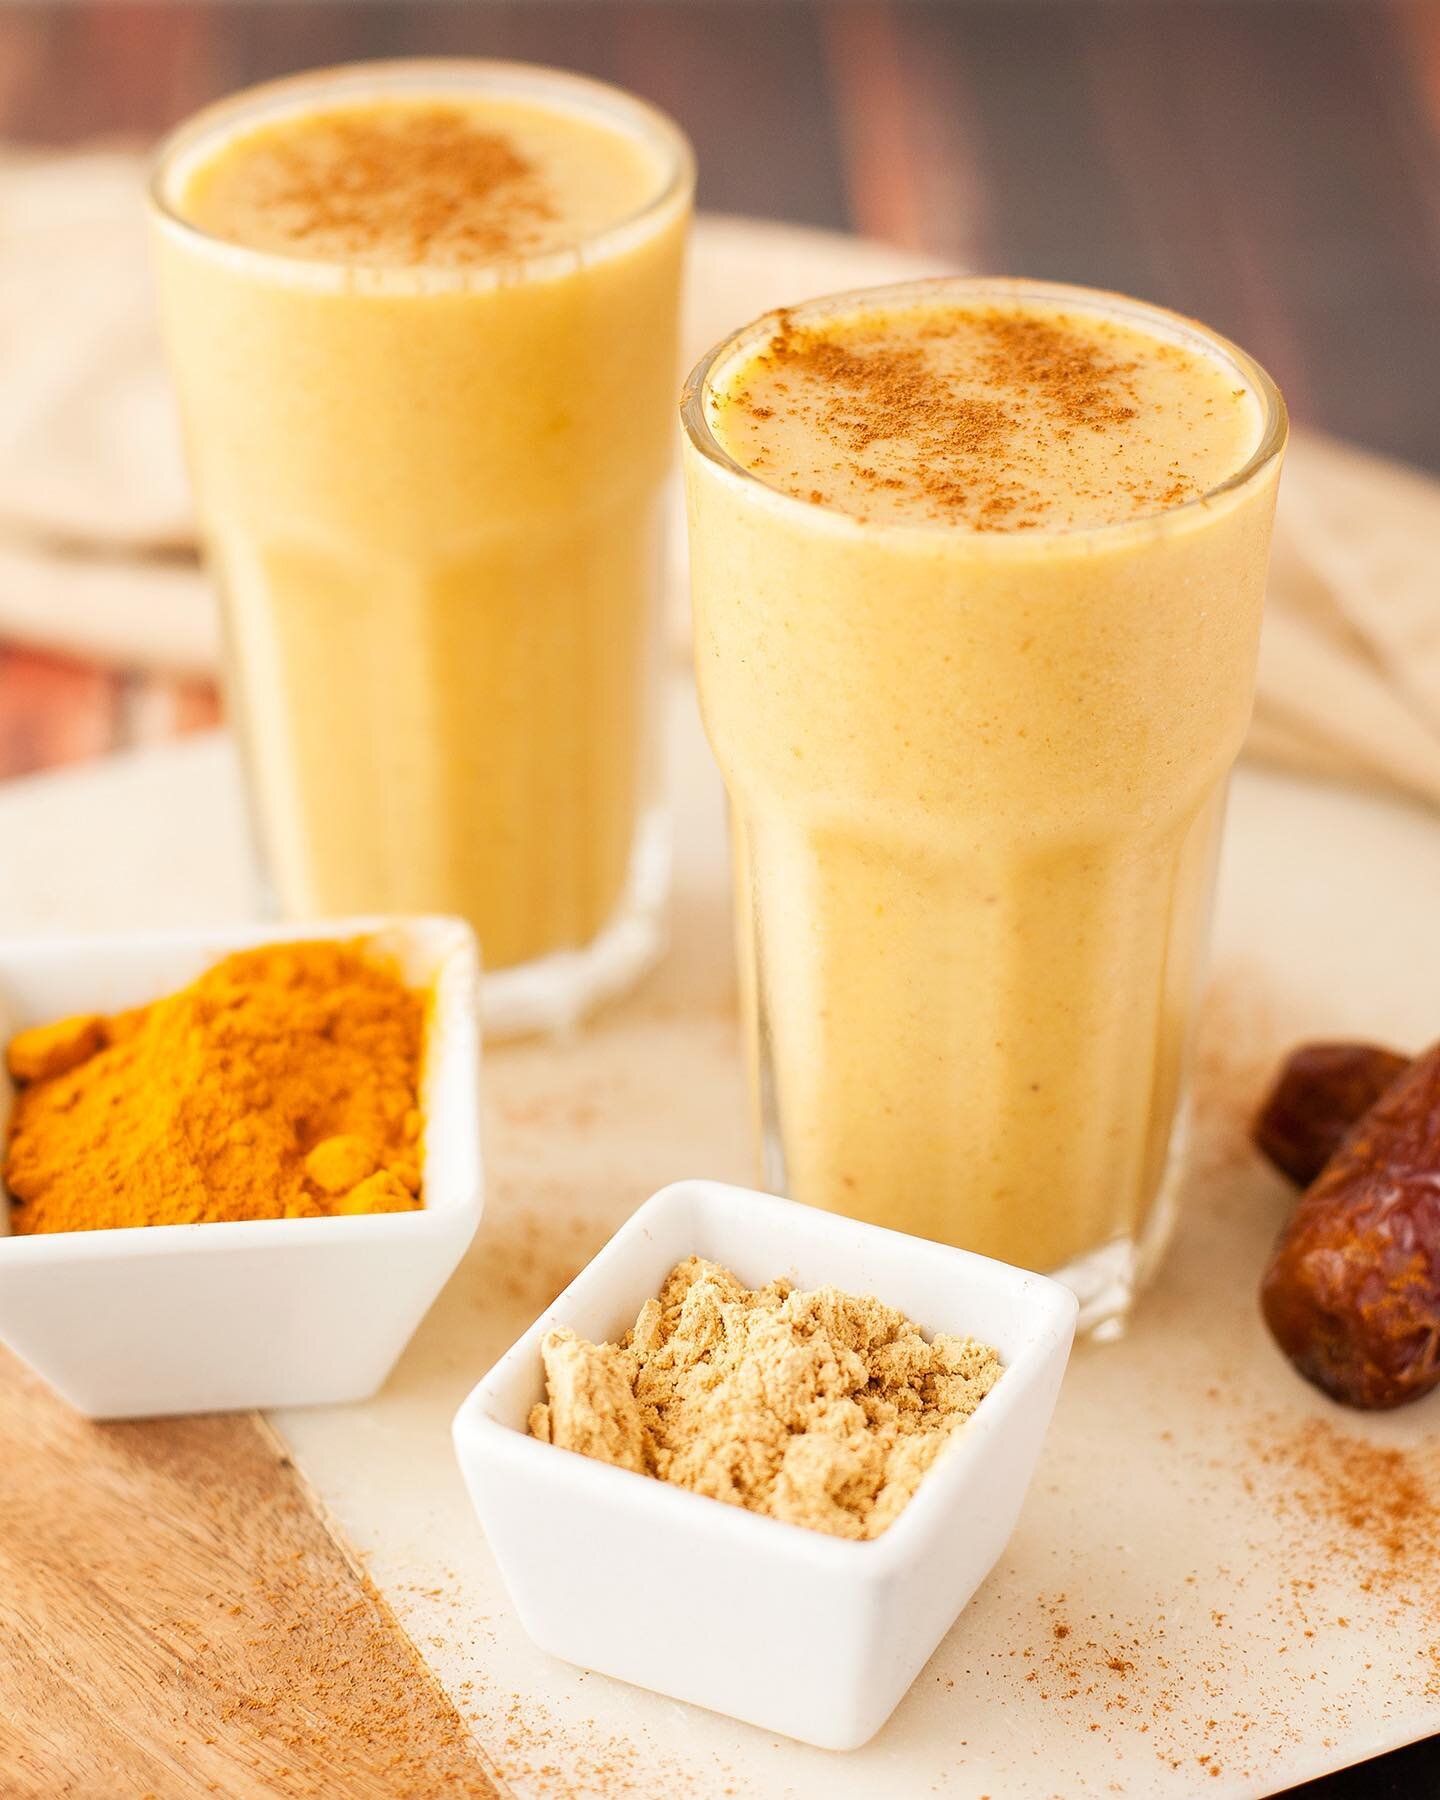 *** NEW RECIPE: CLEAN EATING TURMERIC SMOOTHIE ***⠀
Trying to get more of the amazing anti-inflammatory + skin boosting benefits of turmeric into your diet?!?! You gotta try this AMAZING smoothie, it tastes like dessert but's packed with superfoods a